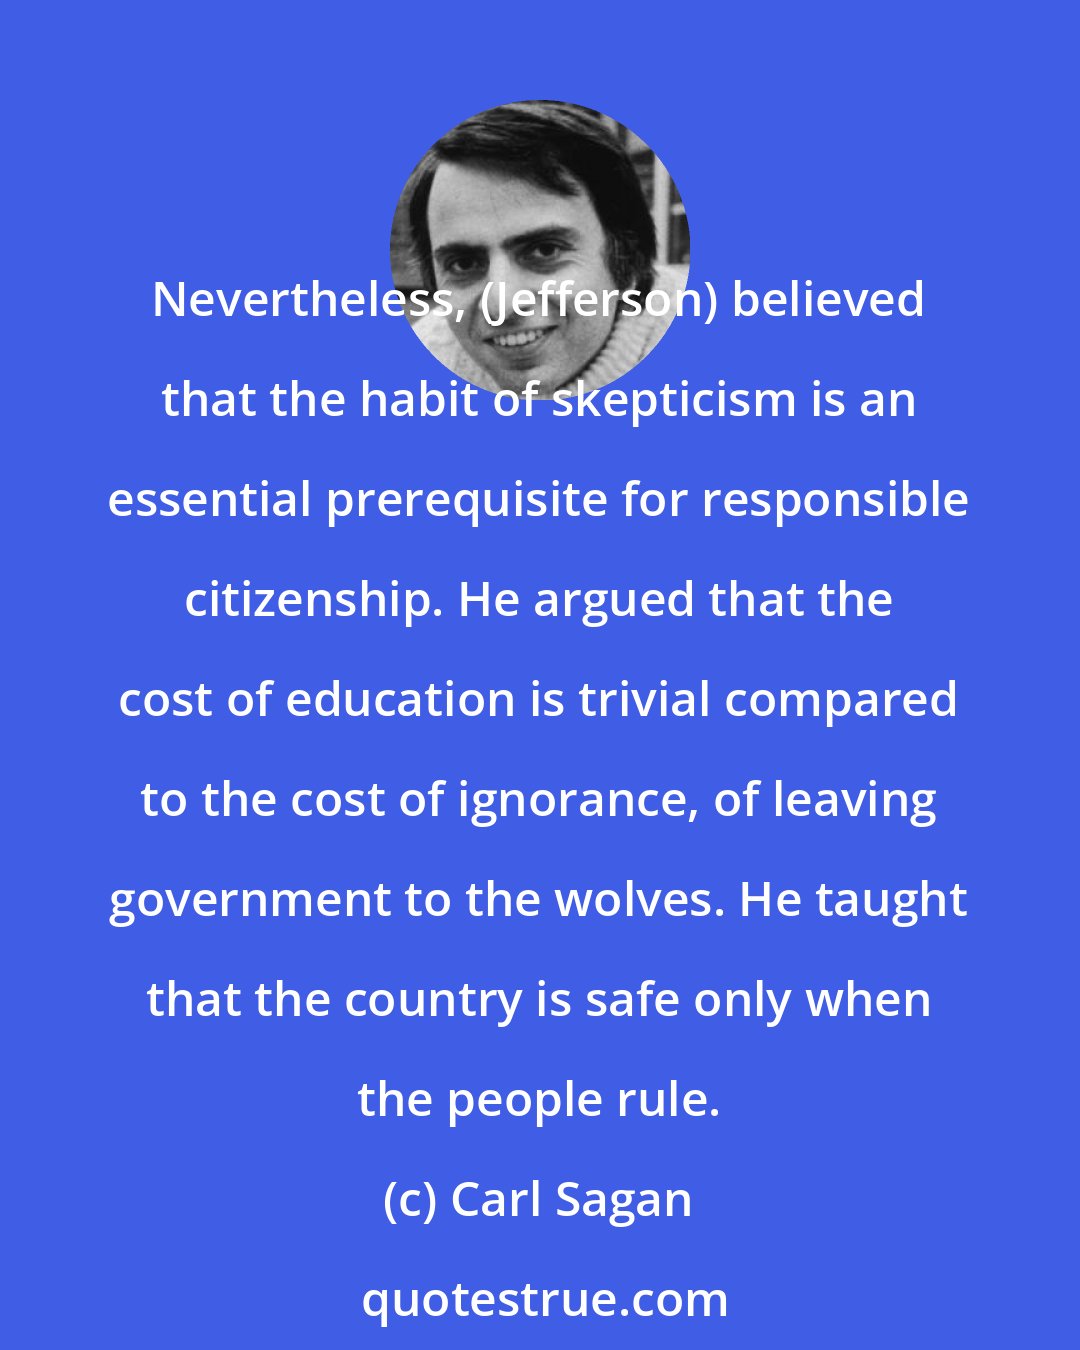 Carl Sagan: Nevertheless, (Jefferson) believed that the habit of skepticism is an essential prerequisite for responsible citizenship. He argued that the cost of education is trivial compared to the cost of ignorance, of leaving government to the wolves. He taught that the country is safe only when the people rule.